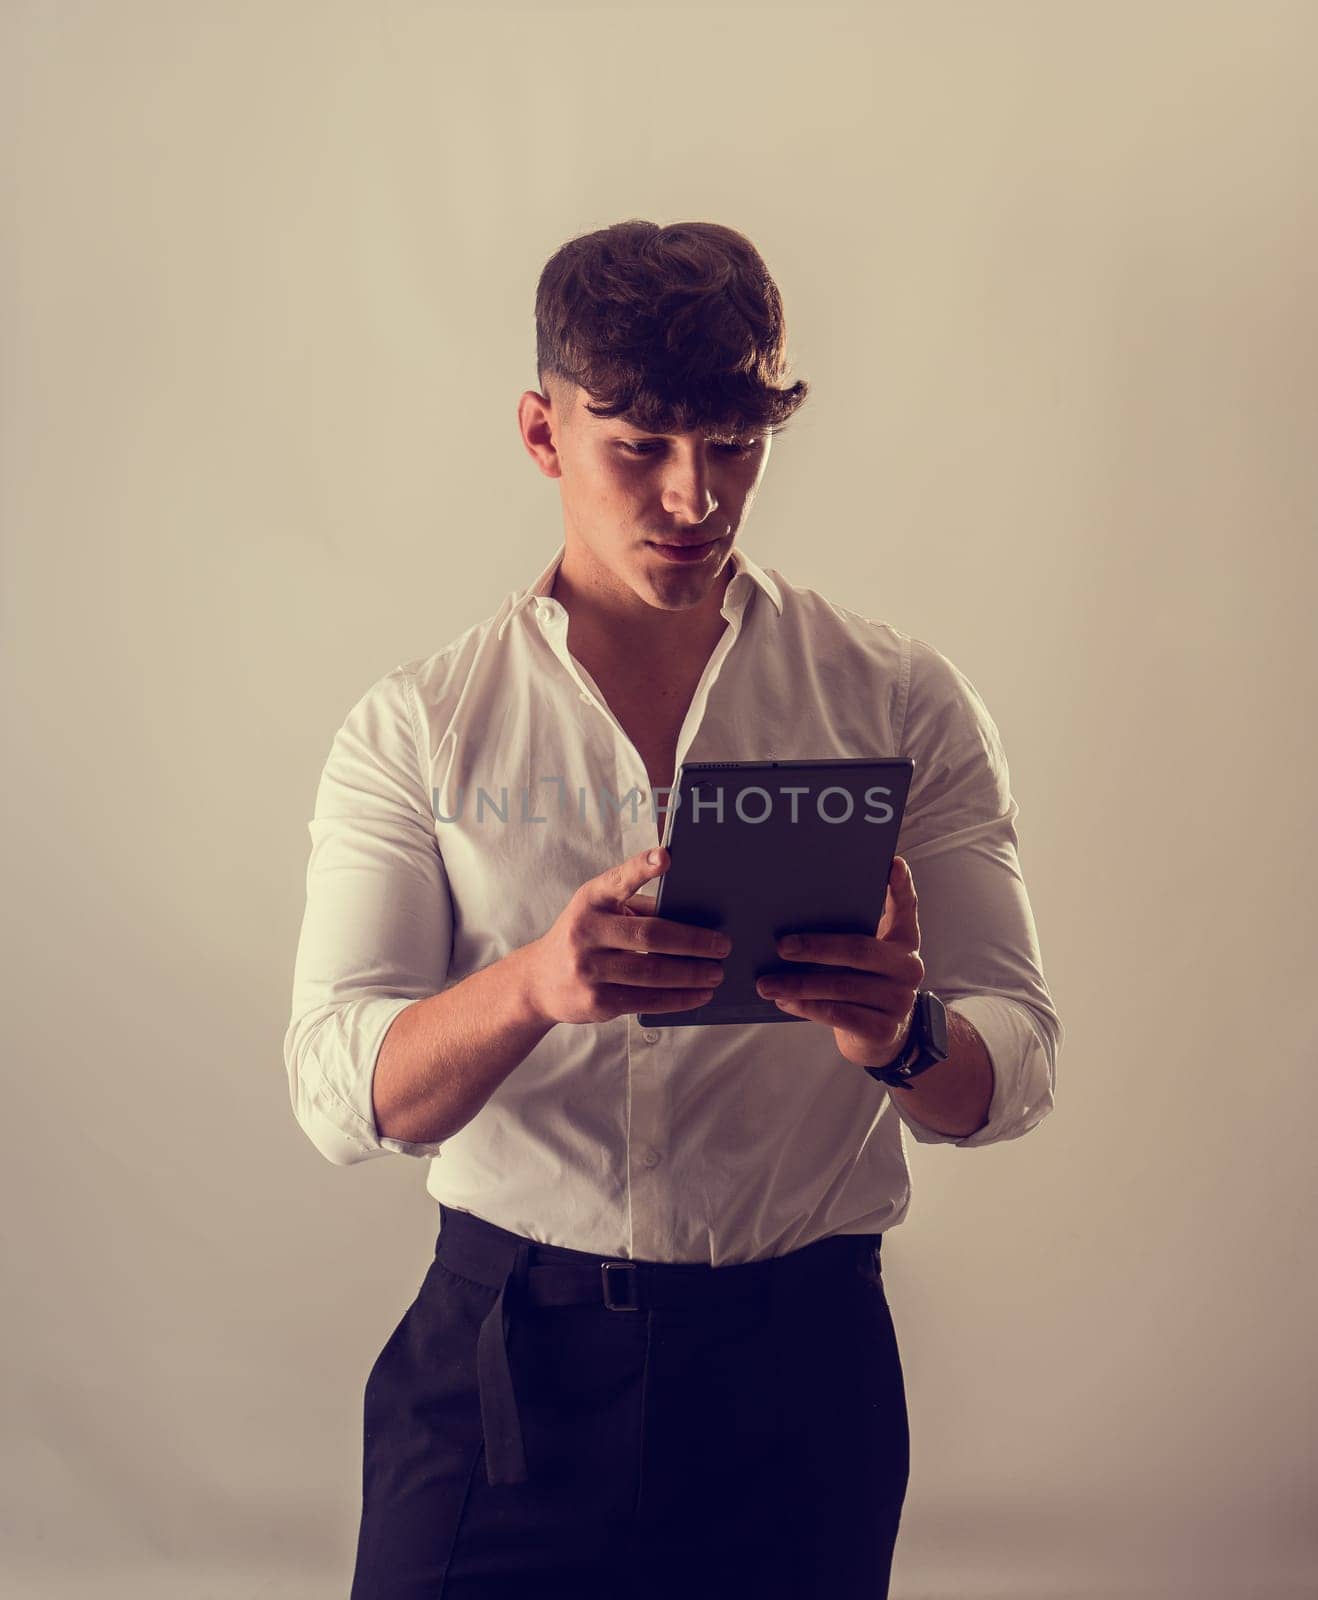 A Curious Man in a Crisp White Shirt Engrossed in a Technological Tablet by artofphoto